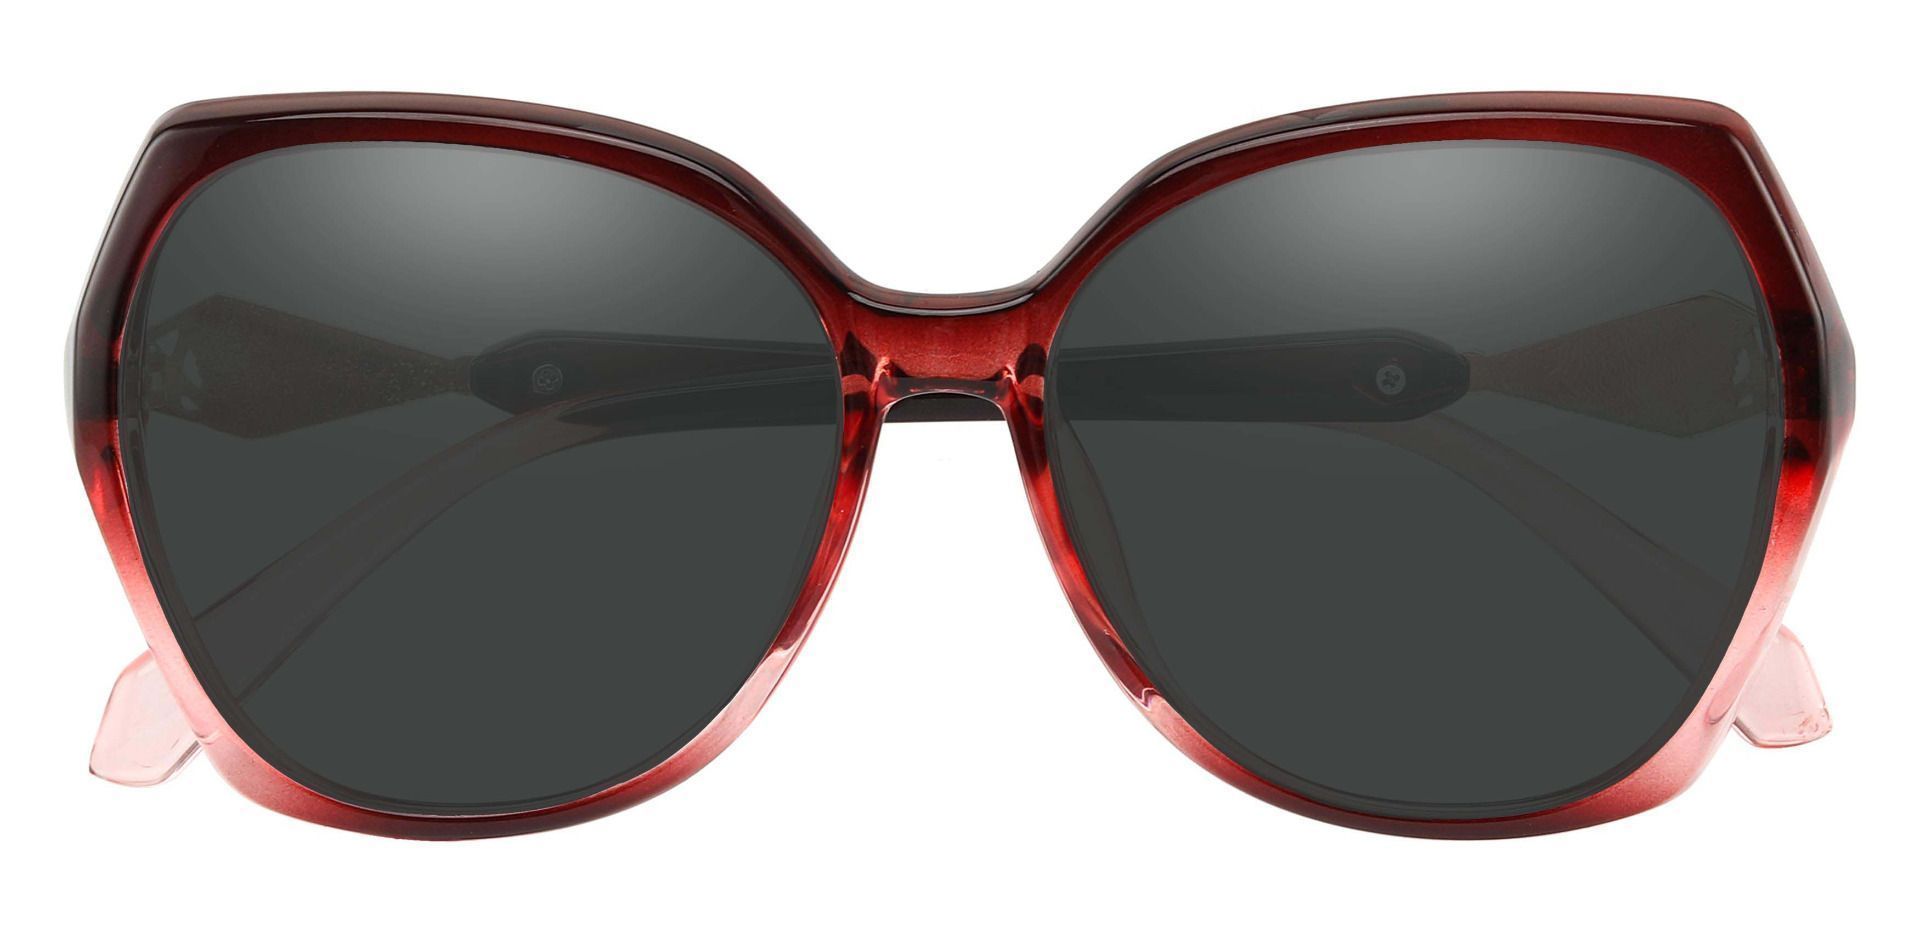 Solitaire Geometric Single Vision Sunglasses - Red Frame With Gray Lenses